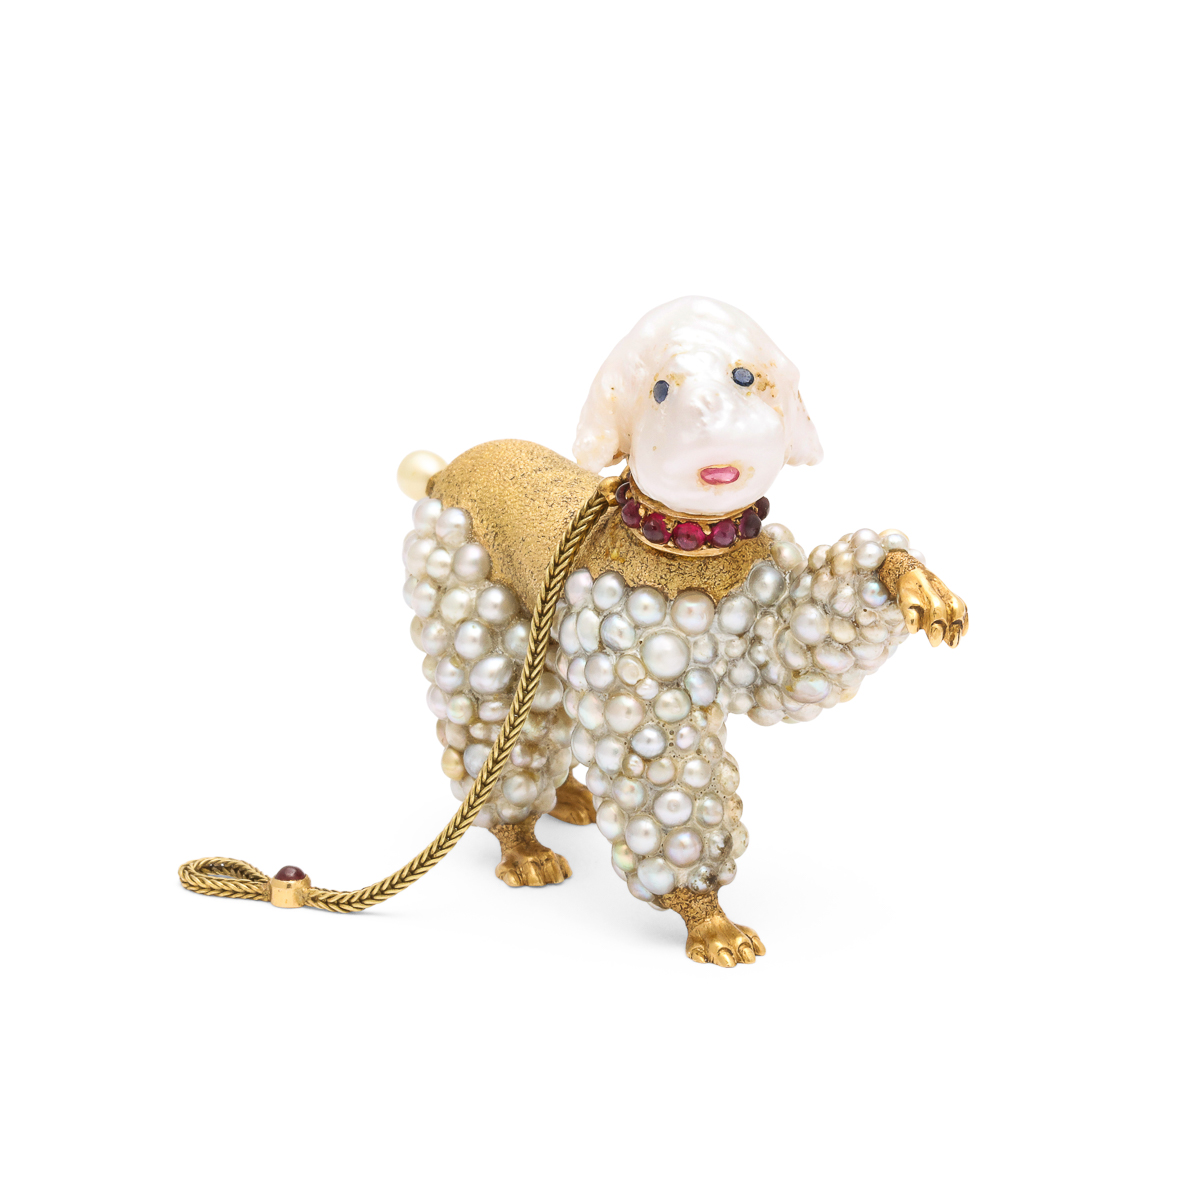 Gold poodle with baroque pearl head and pearl body, with one paw lifted.